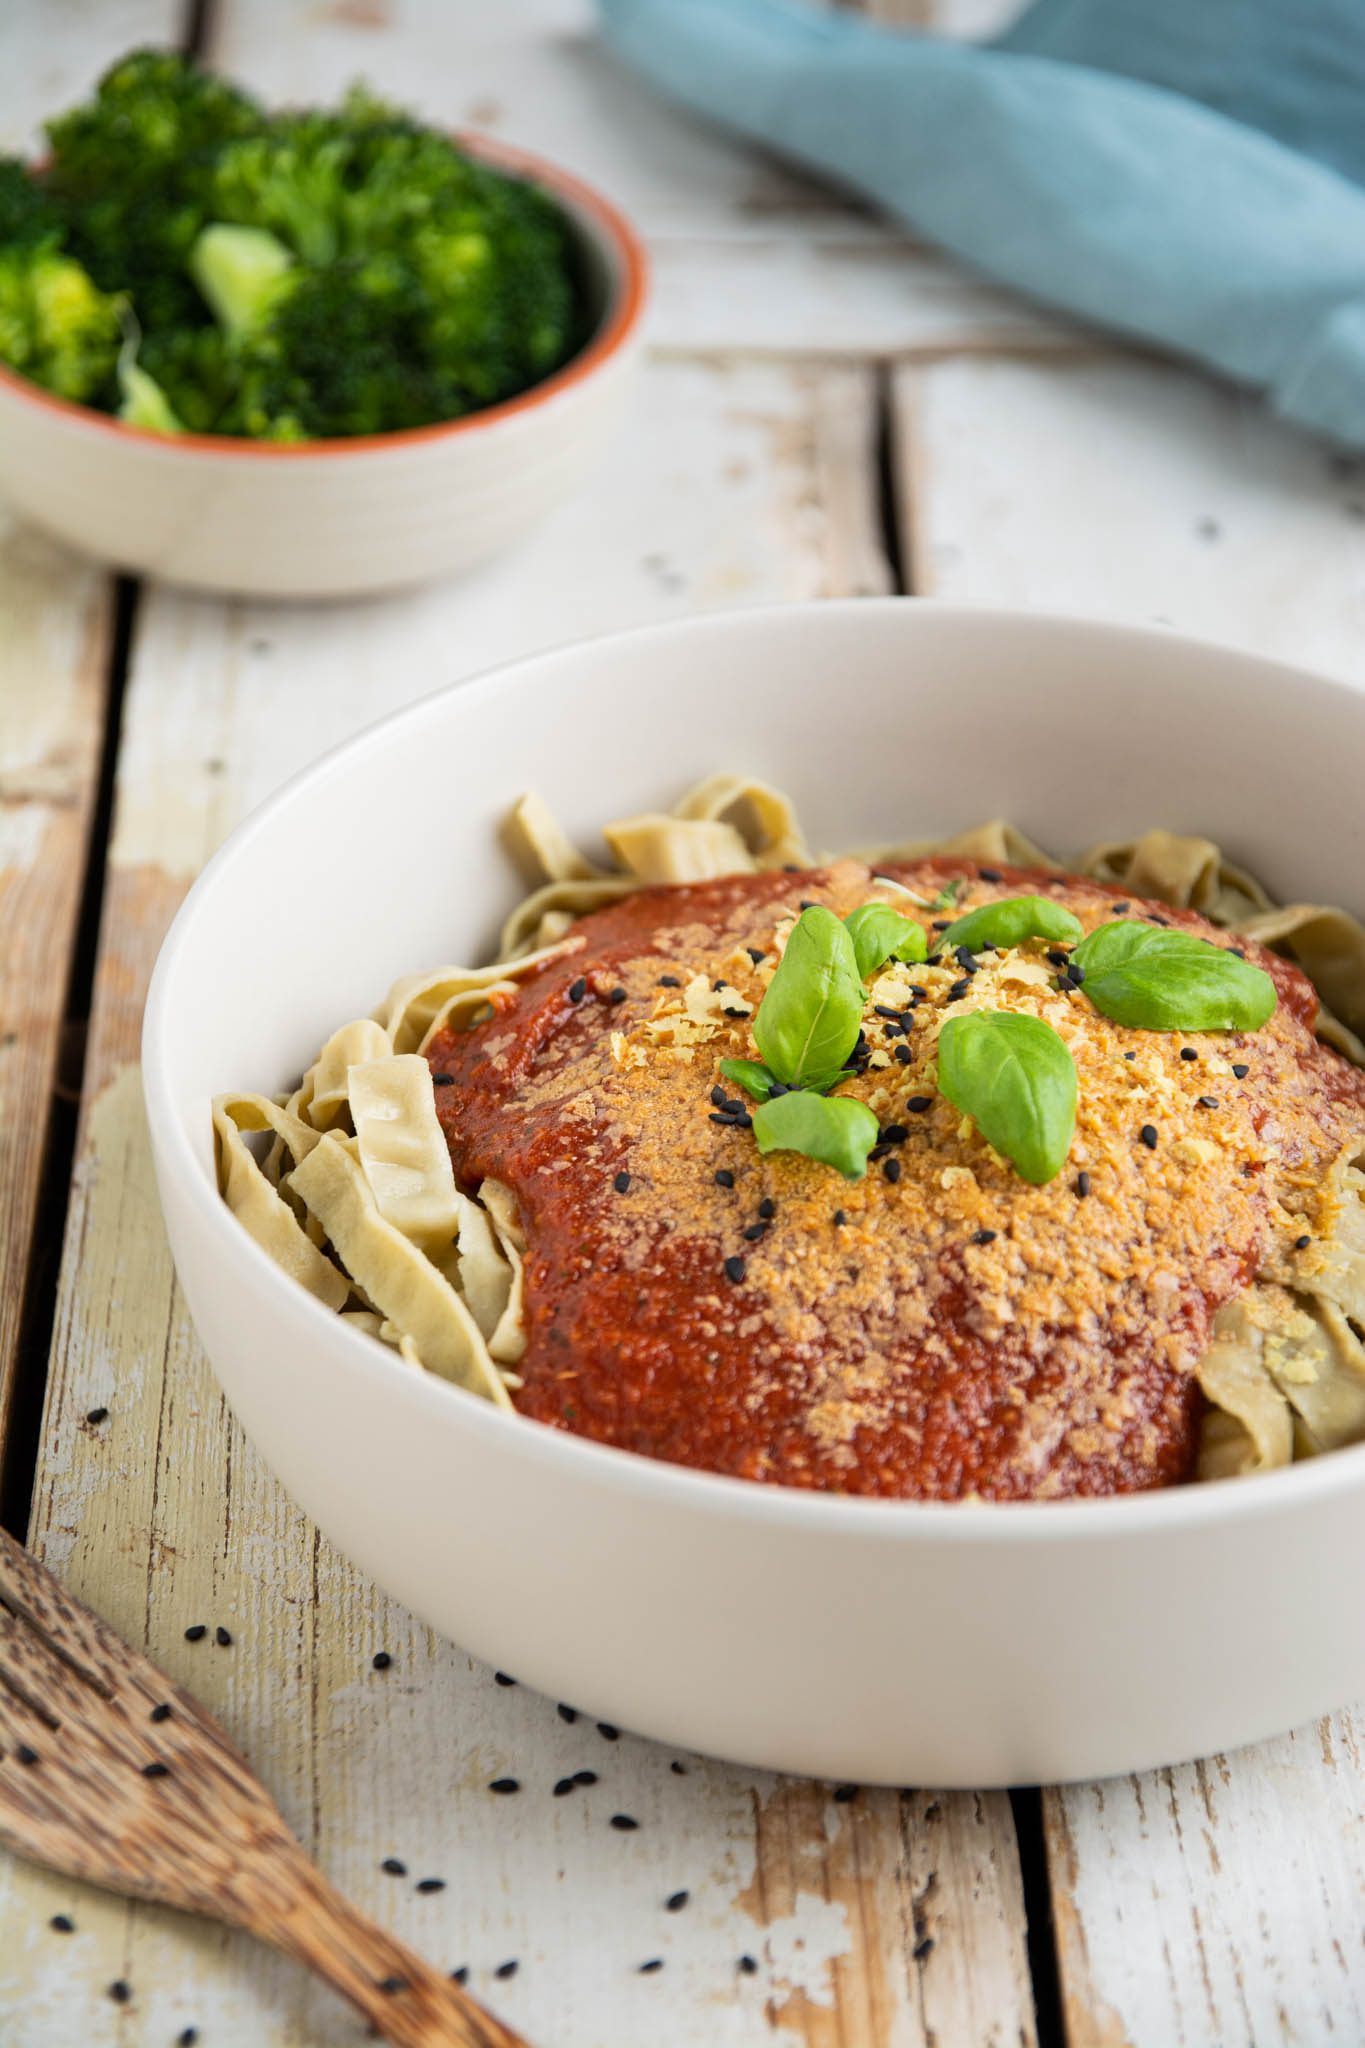 Learn how to make a low glycemic edamame pasta with marinara sauce and broccoli. Perfect blood sugar balancing and high-protein plant-based meal.